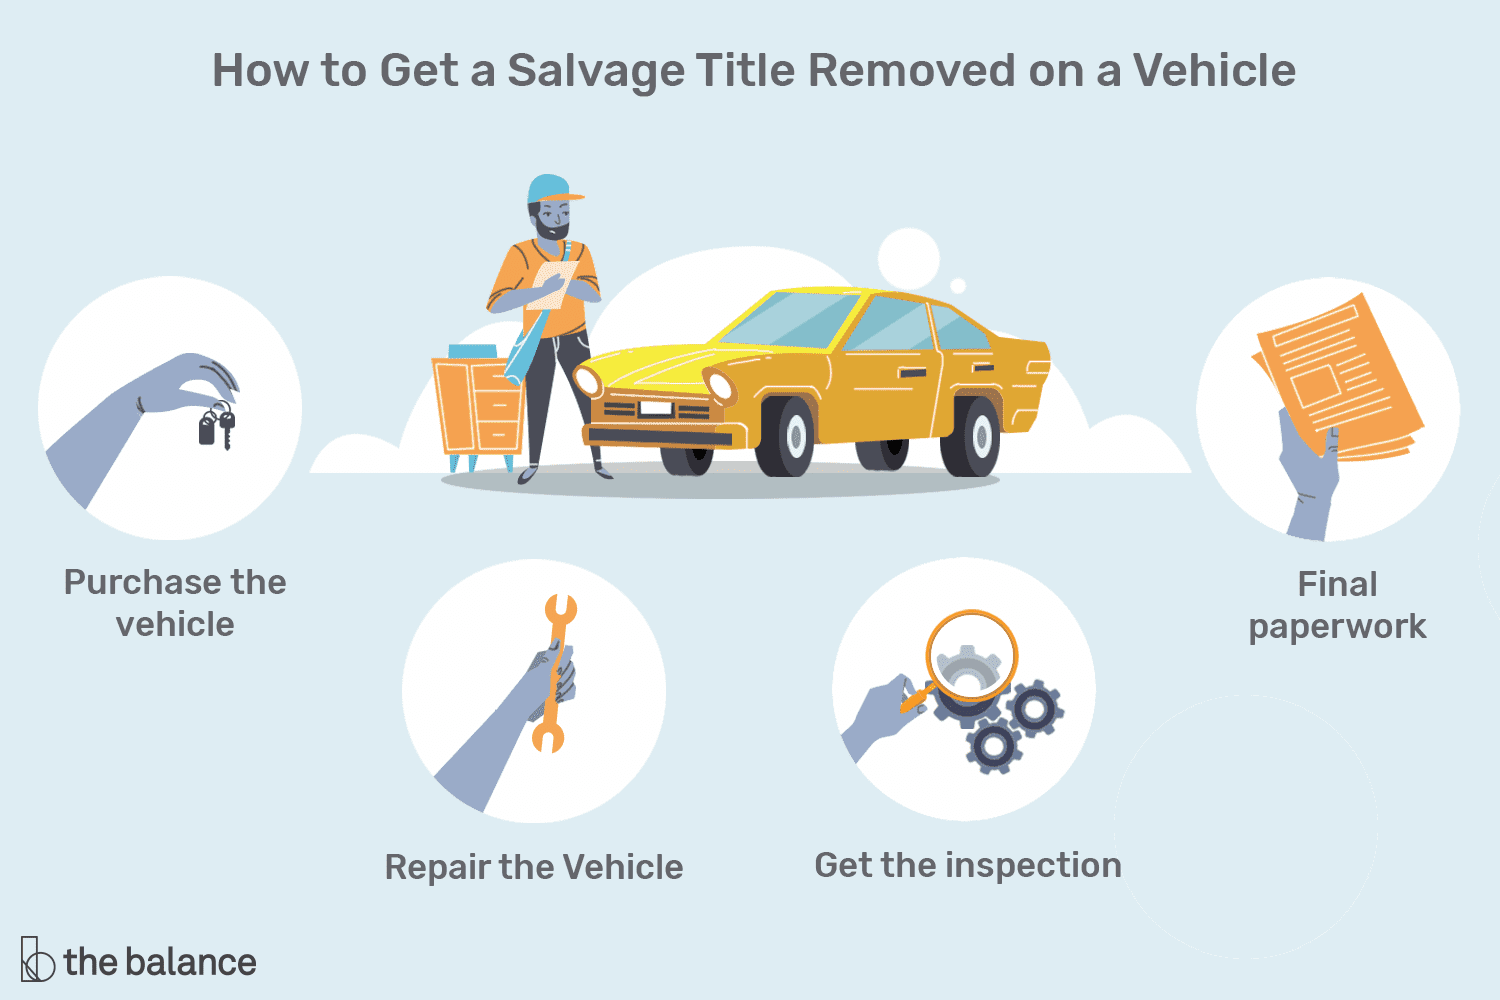 How to Turn a Salvage Title into a Rebuilt Title